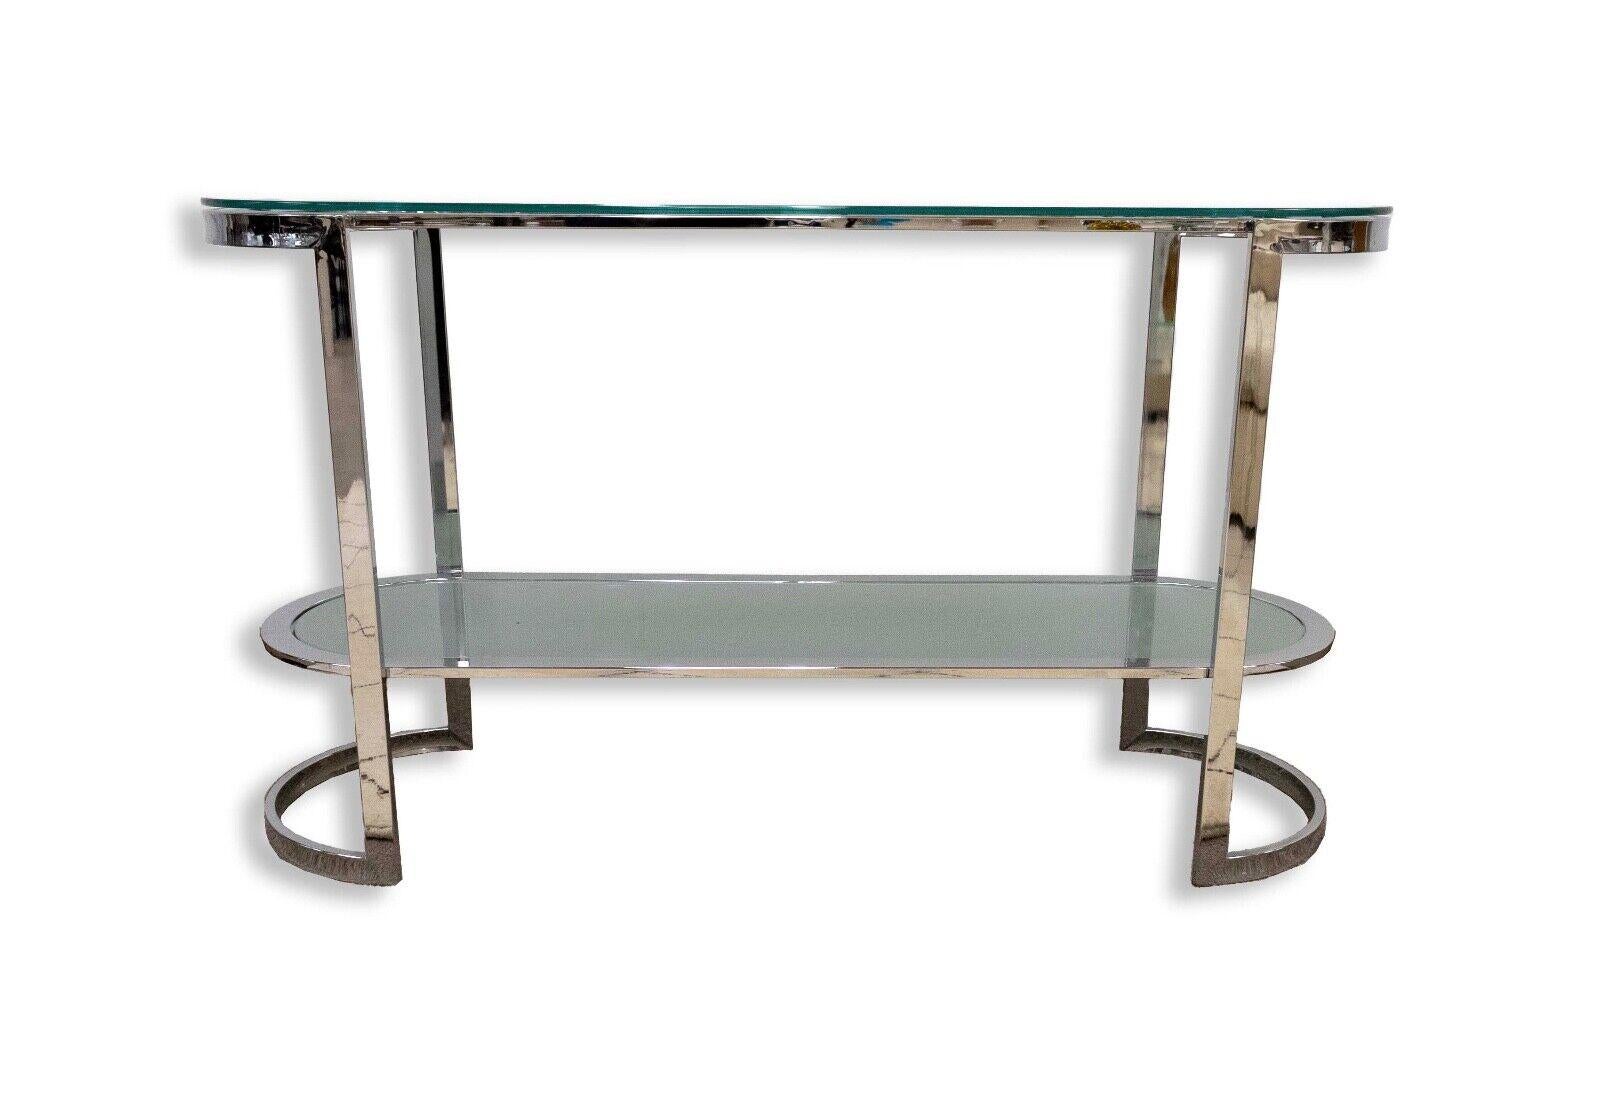 Introducing a stunning blend of form and function with our Glass & Curved Chrome Console Table. This contemporary modern piece embodies sleek elegance and bold design, making it a striking addition to any living space. Crafted with a clear glass top